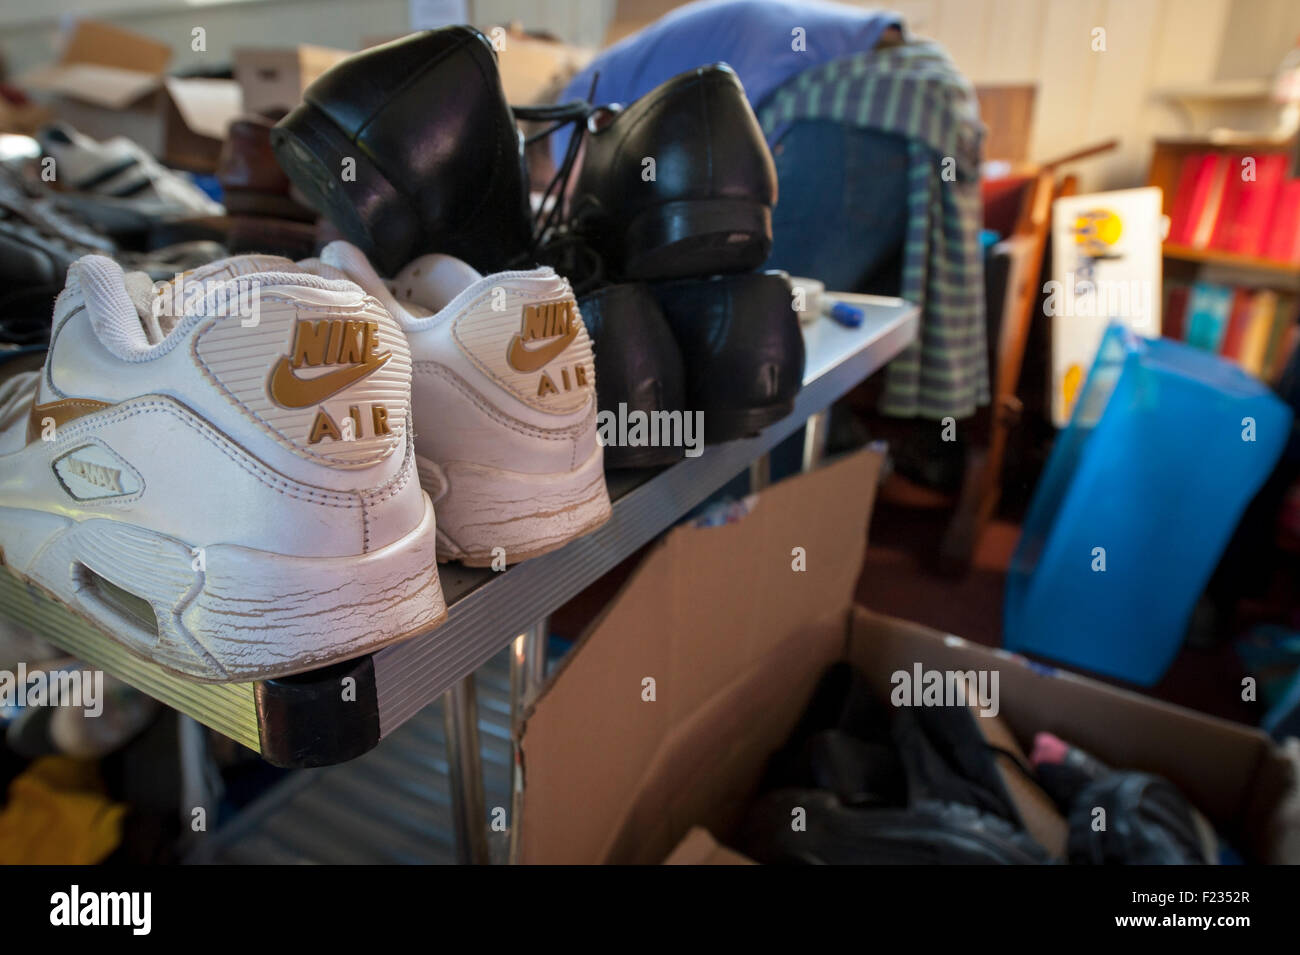 Exeter, UK. 10th Sep, 2015. A pair of Nike Air trainers are donated at the Exeter Calais Solidarity collection for refugees living in 'The Jungle' refguee camp in Calais Credit:  Clive Chilvers/Alamy Live News Stock Photo